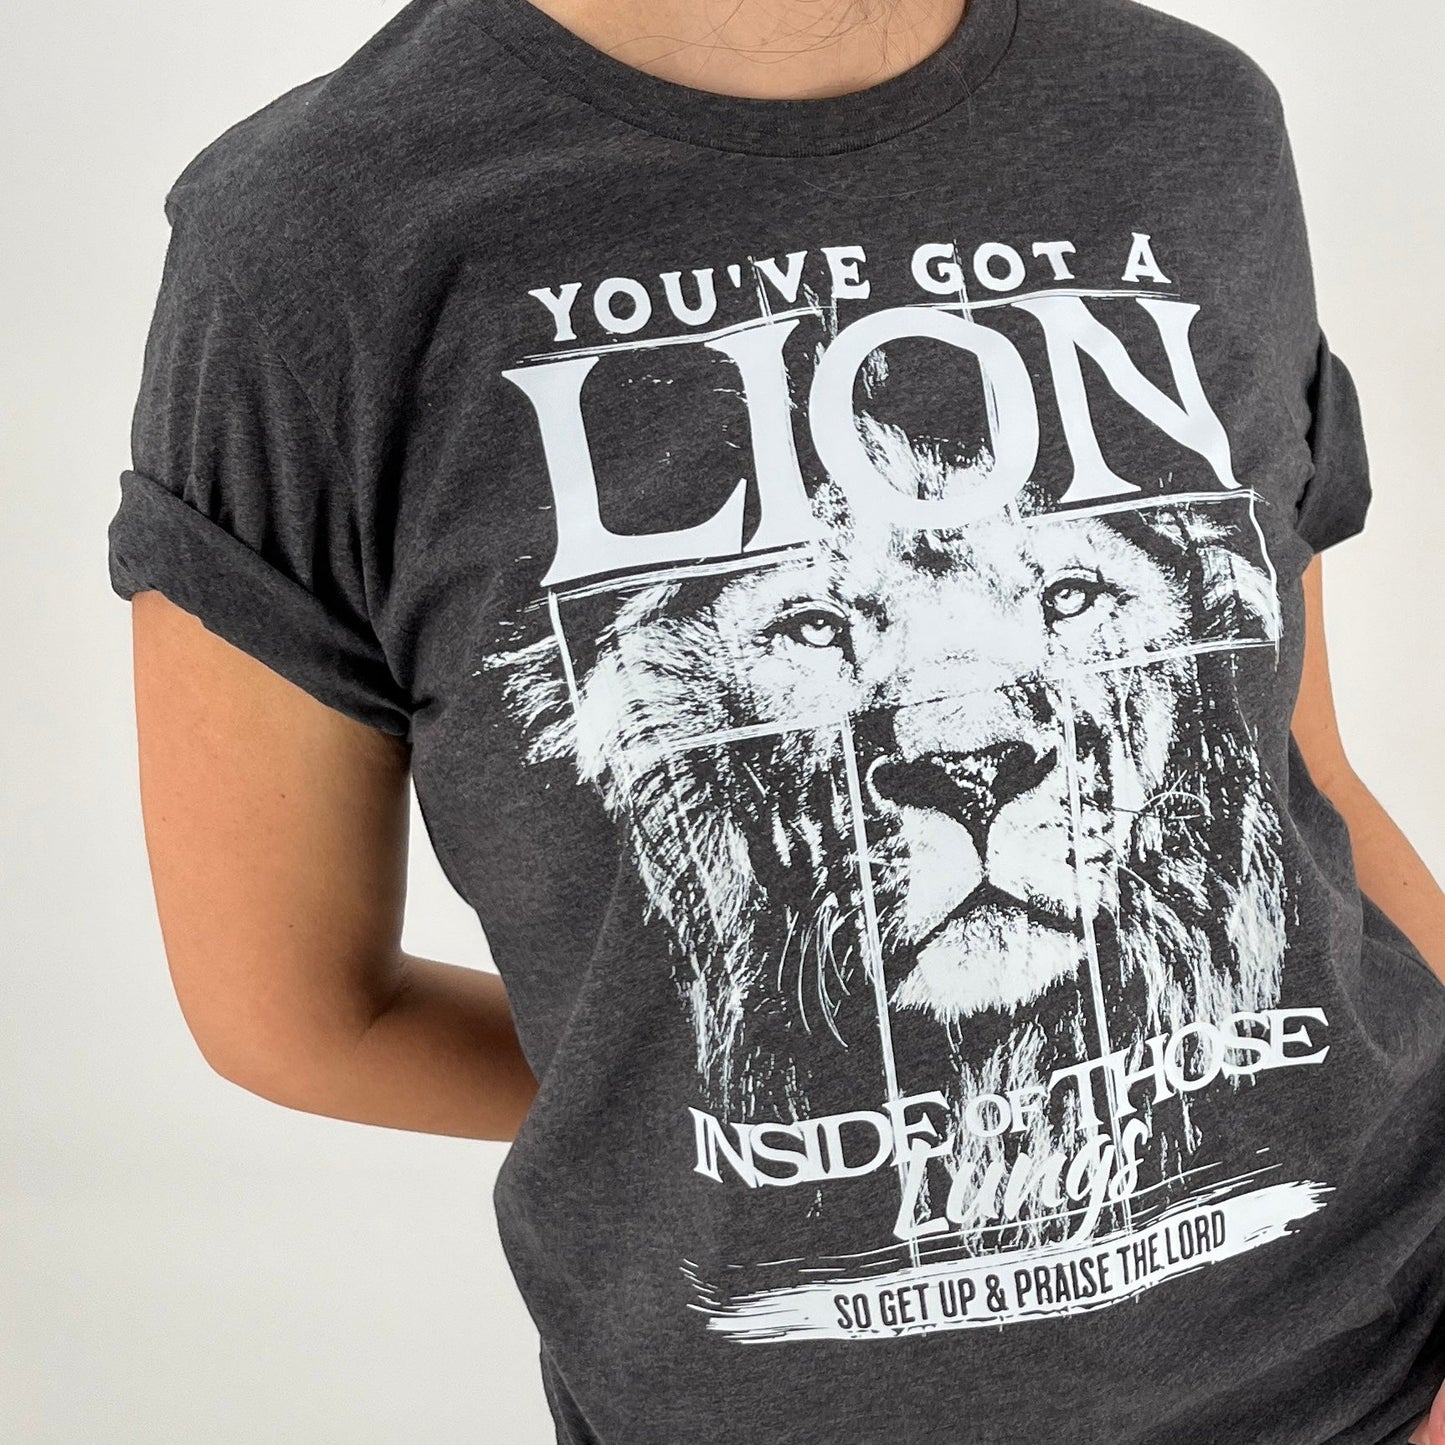 You got a lion inside of those lungs Graphic Tee